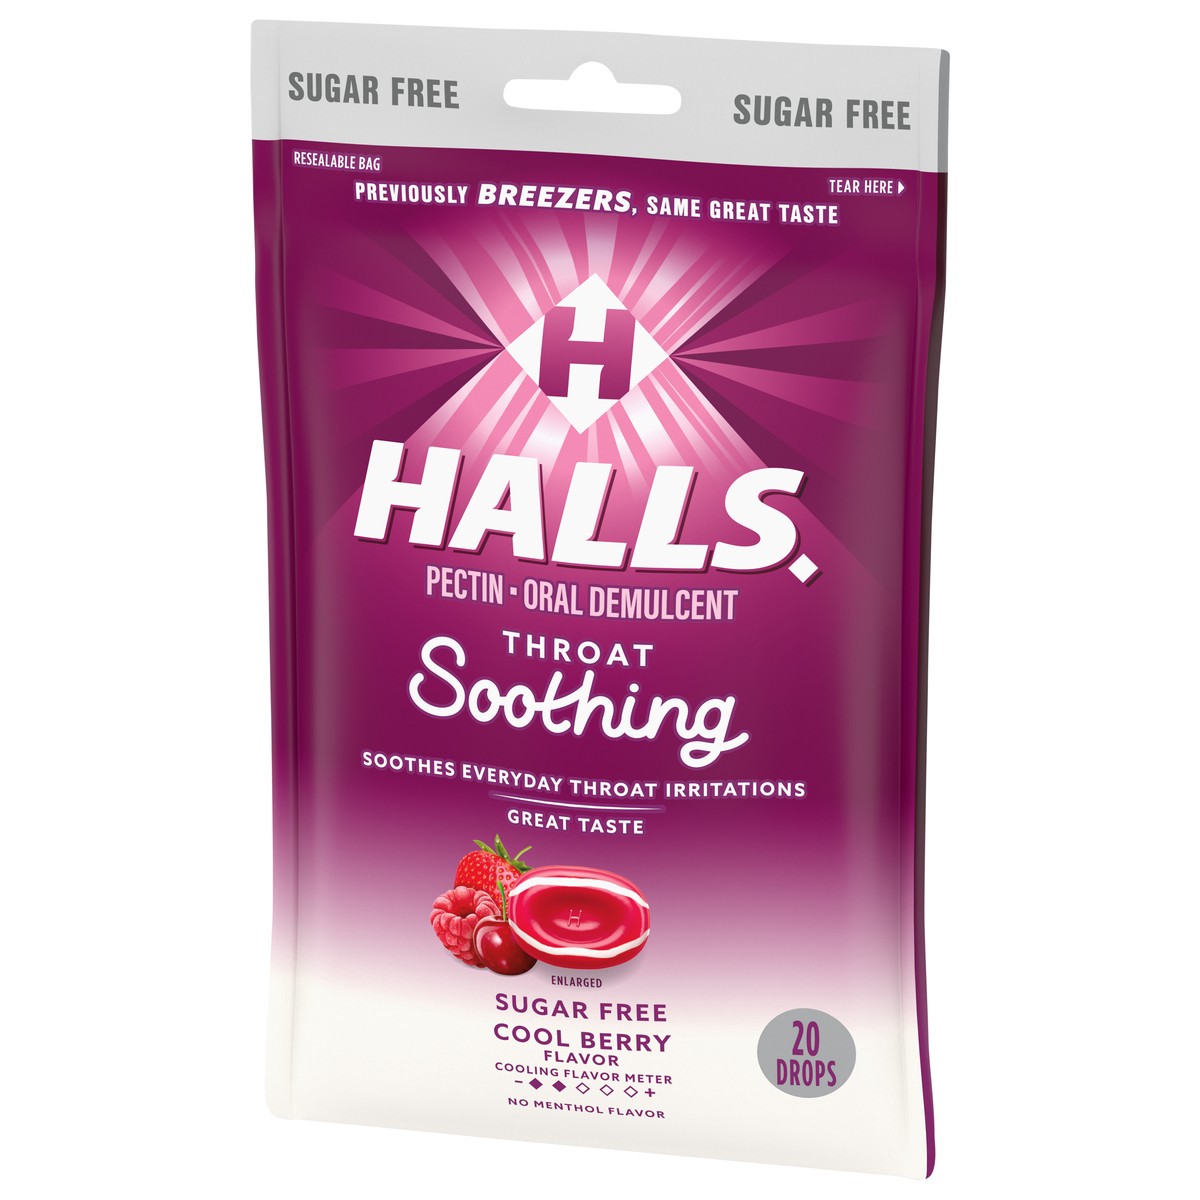 slide 9 of 9, HALLS Throat Soothing (Formerly HALLS Breezers) Cool Berry Sugar Free Throat Drops, 20 Drops, 2.46 oz